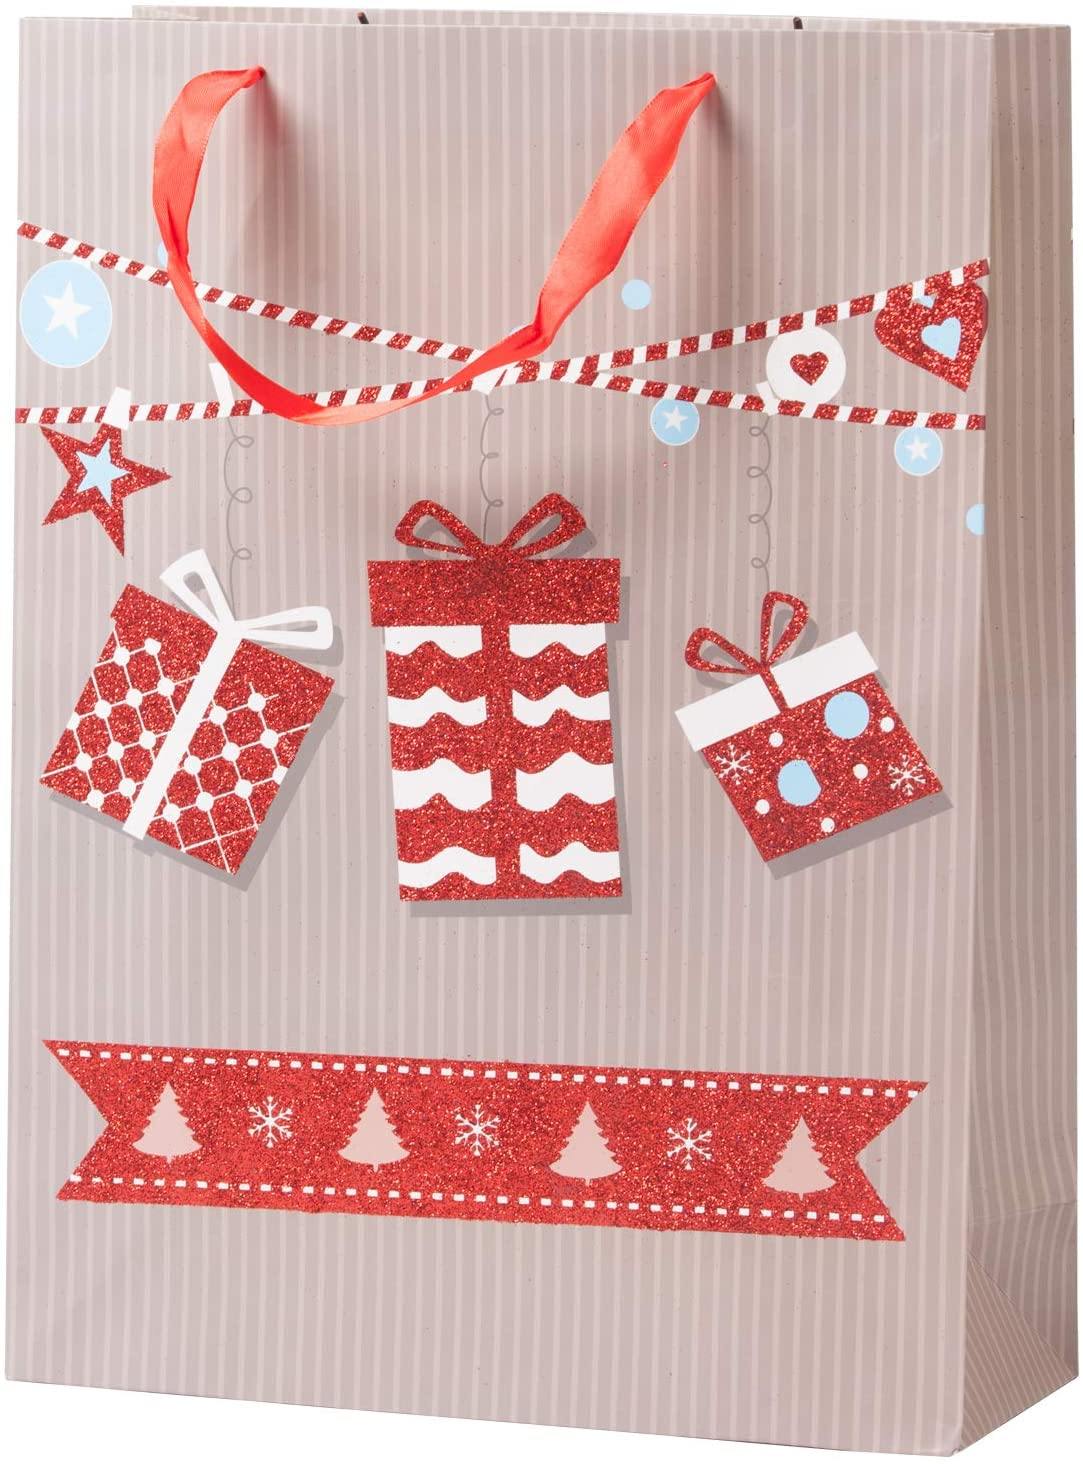 Christmas Paper Gift Bags Bulk Assortment 1 Dozen Holiday Themes Print Gift Bags with Handles 3 Sizes 4 Patterns Celebration - Bosonshop